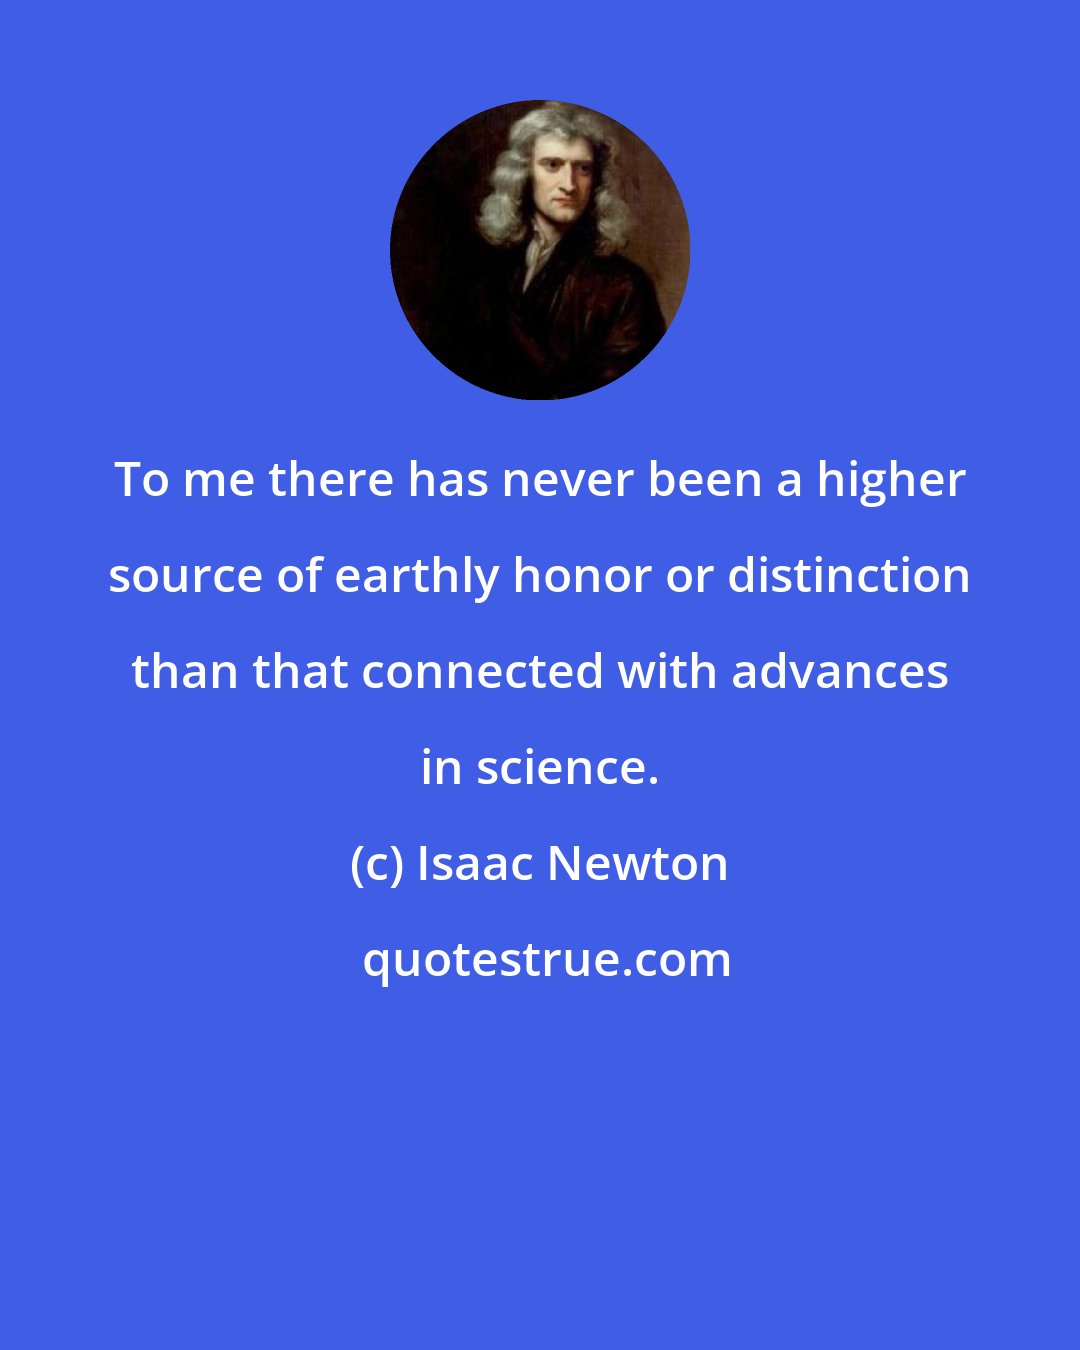 Isaac Newton: To me there has never been a higher source of earthly honor or distinction than that connected with advances in science.